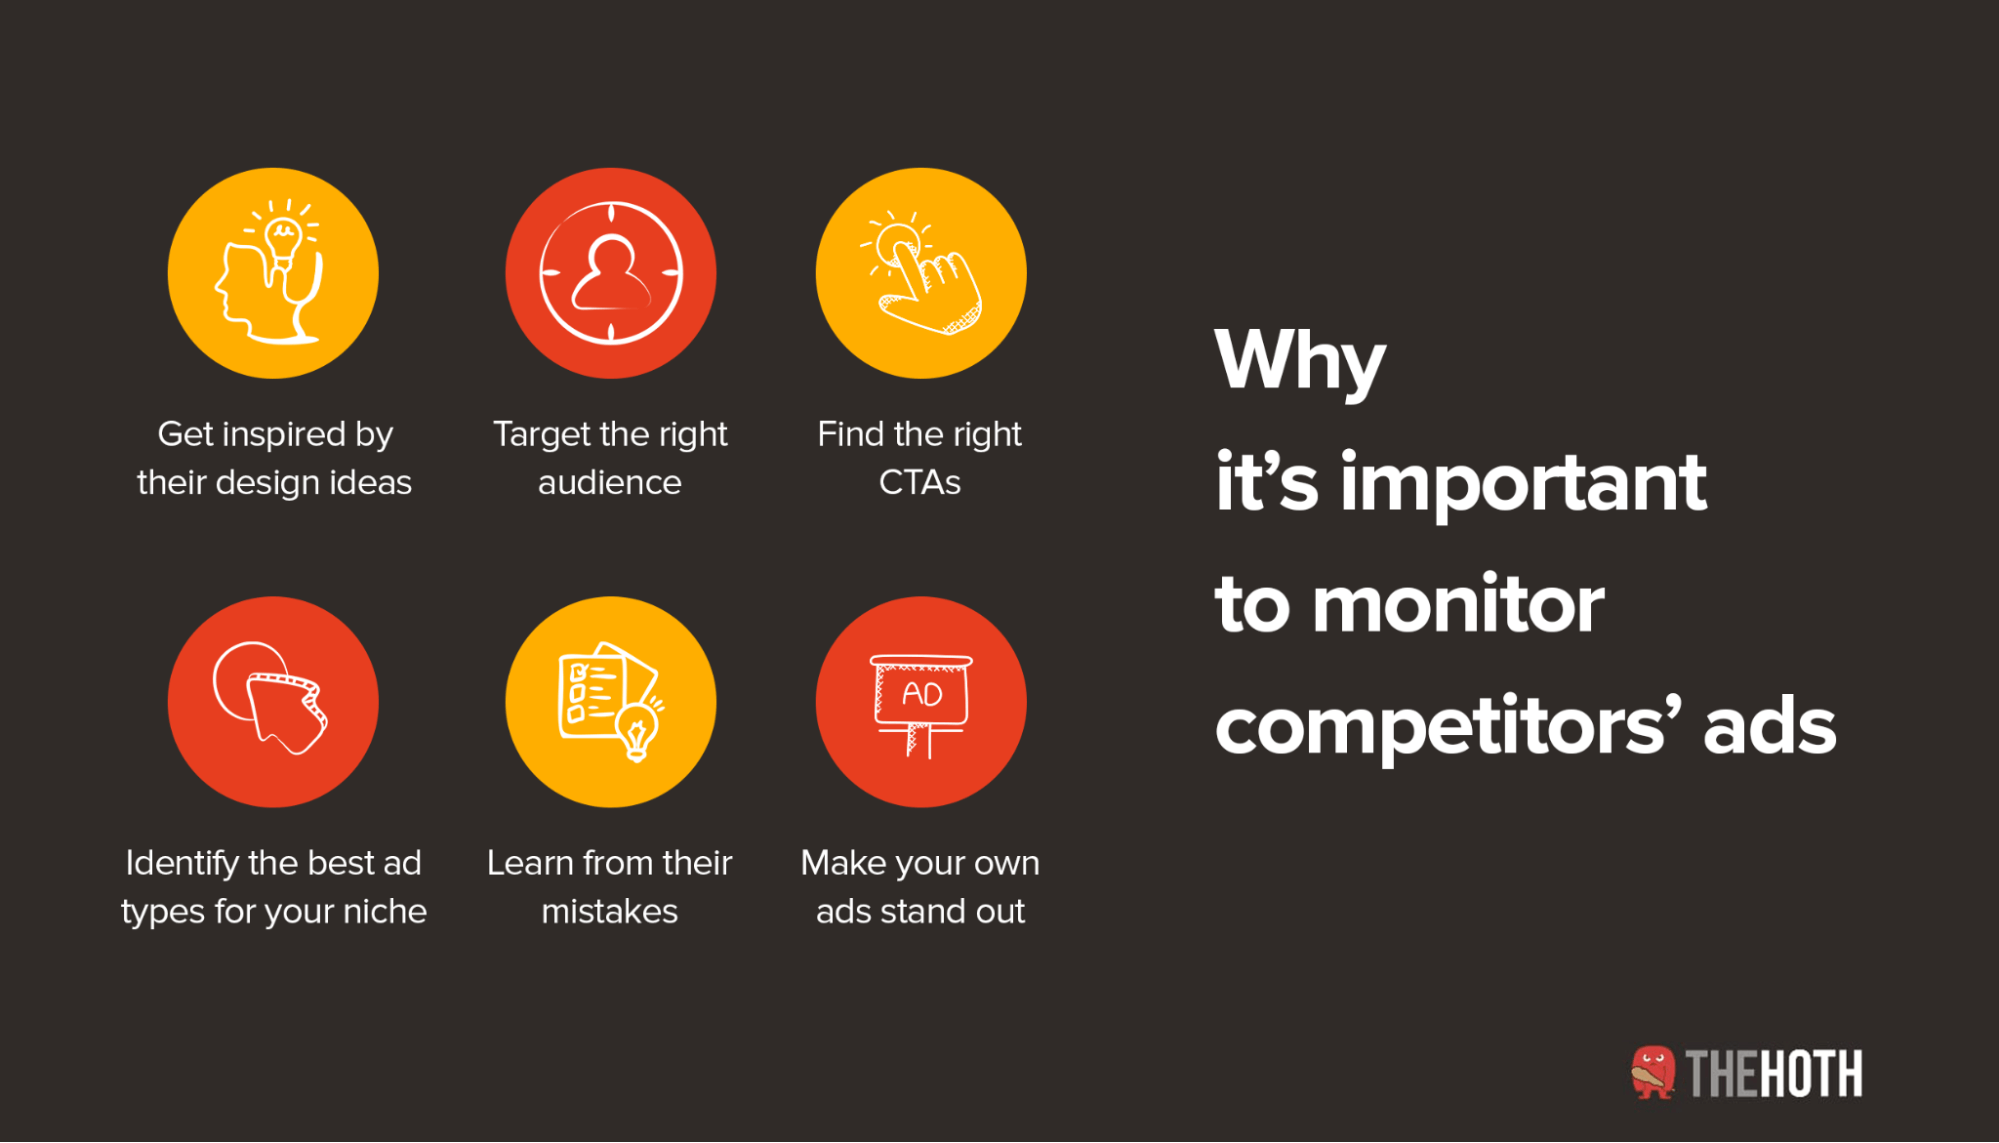 Benefits of monitoring competitors’ ads